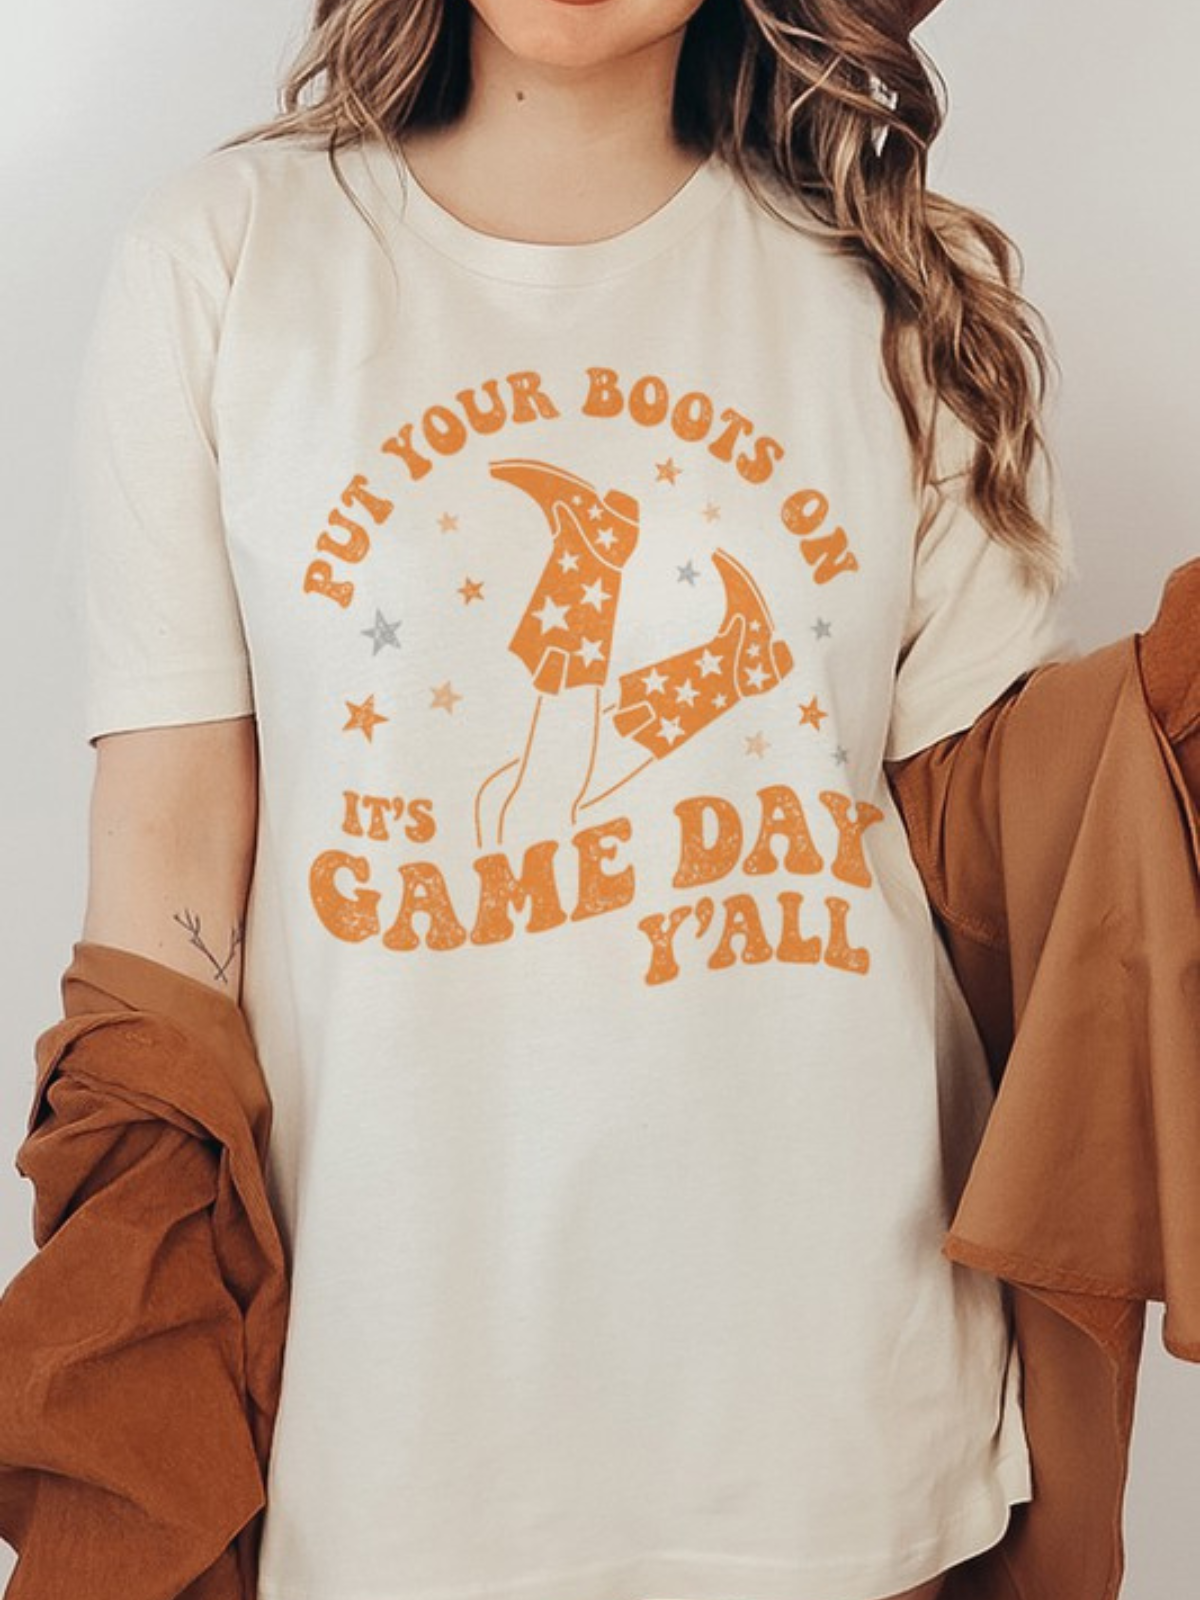 Giddy up its Gameday Blue White Graphic Tee